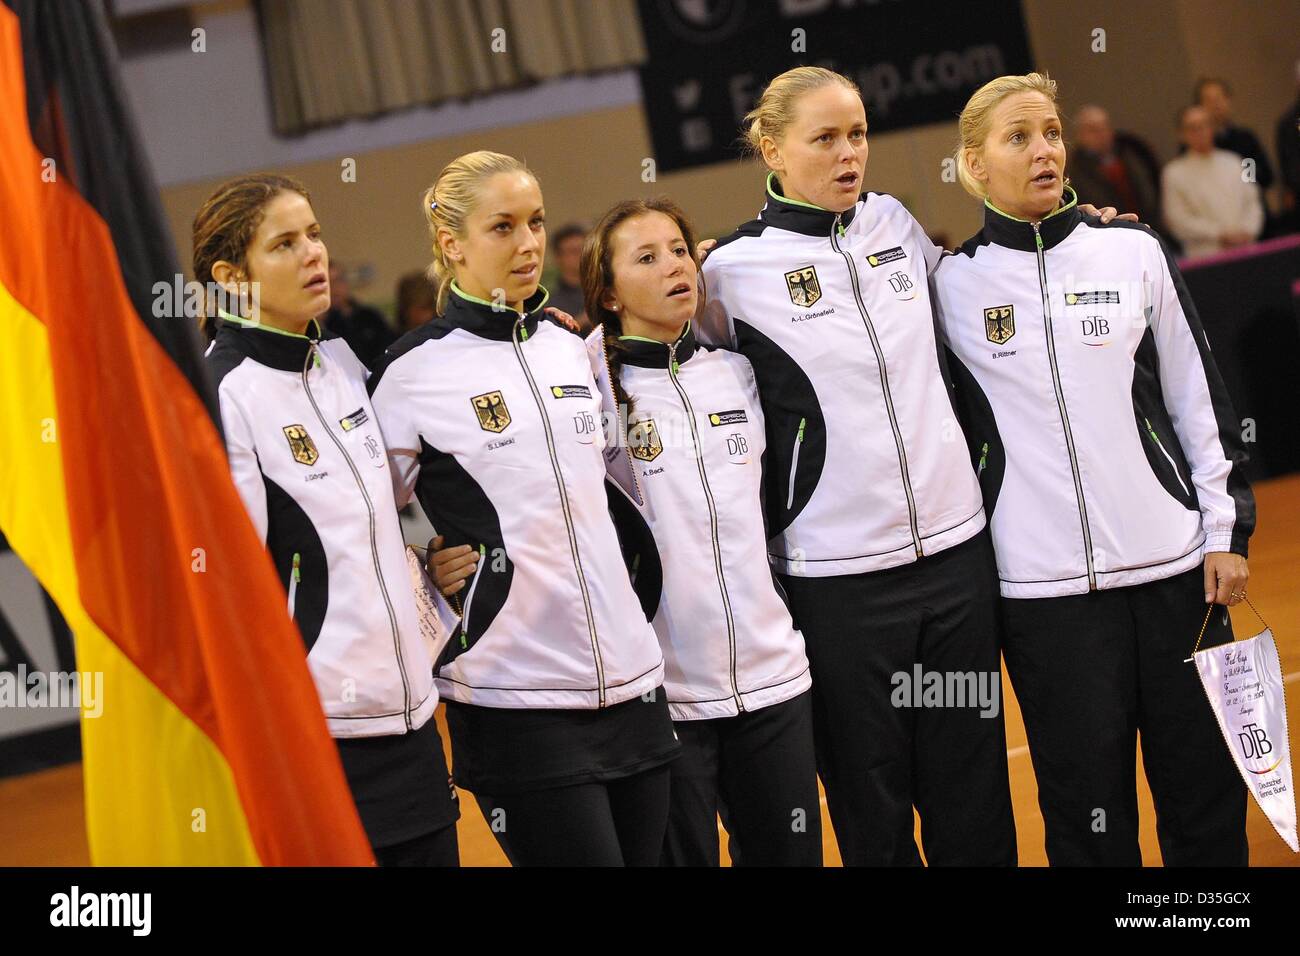 09.02.2013. Palais des Sports Beaublanc, Limoges, France.   Barbara Rittner Germany  Annika Beck All Juliet Goerges, Anna Lena Groenefeld and Sabine Lisicki Germany team line up. Tennis France versus Germany Fed Cup Tennis Cup. Stock Photo